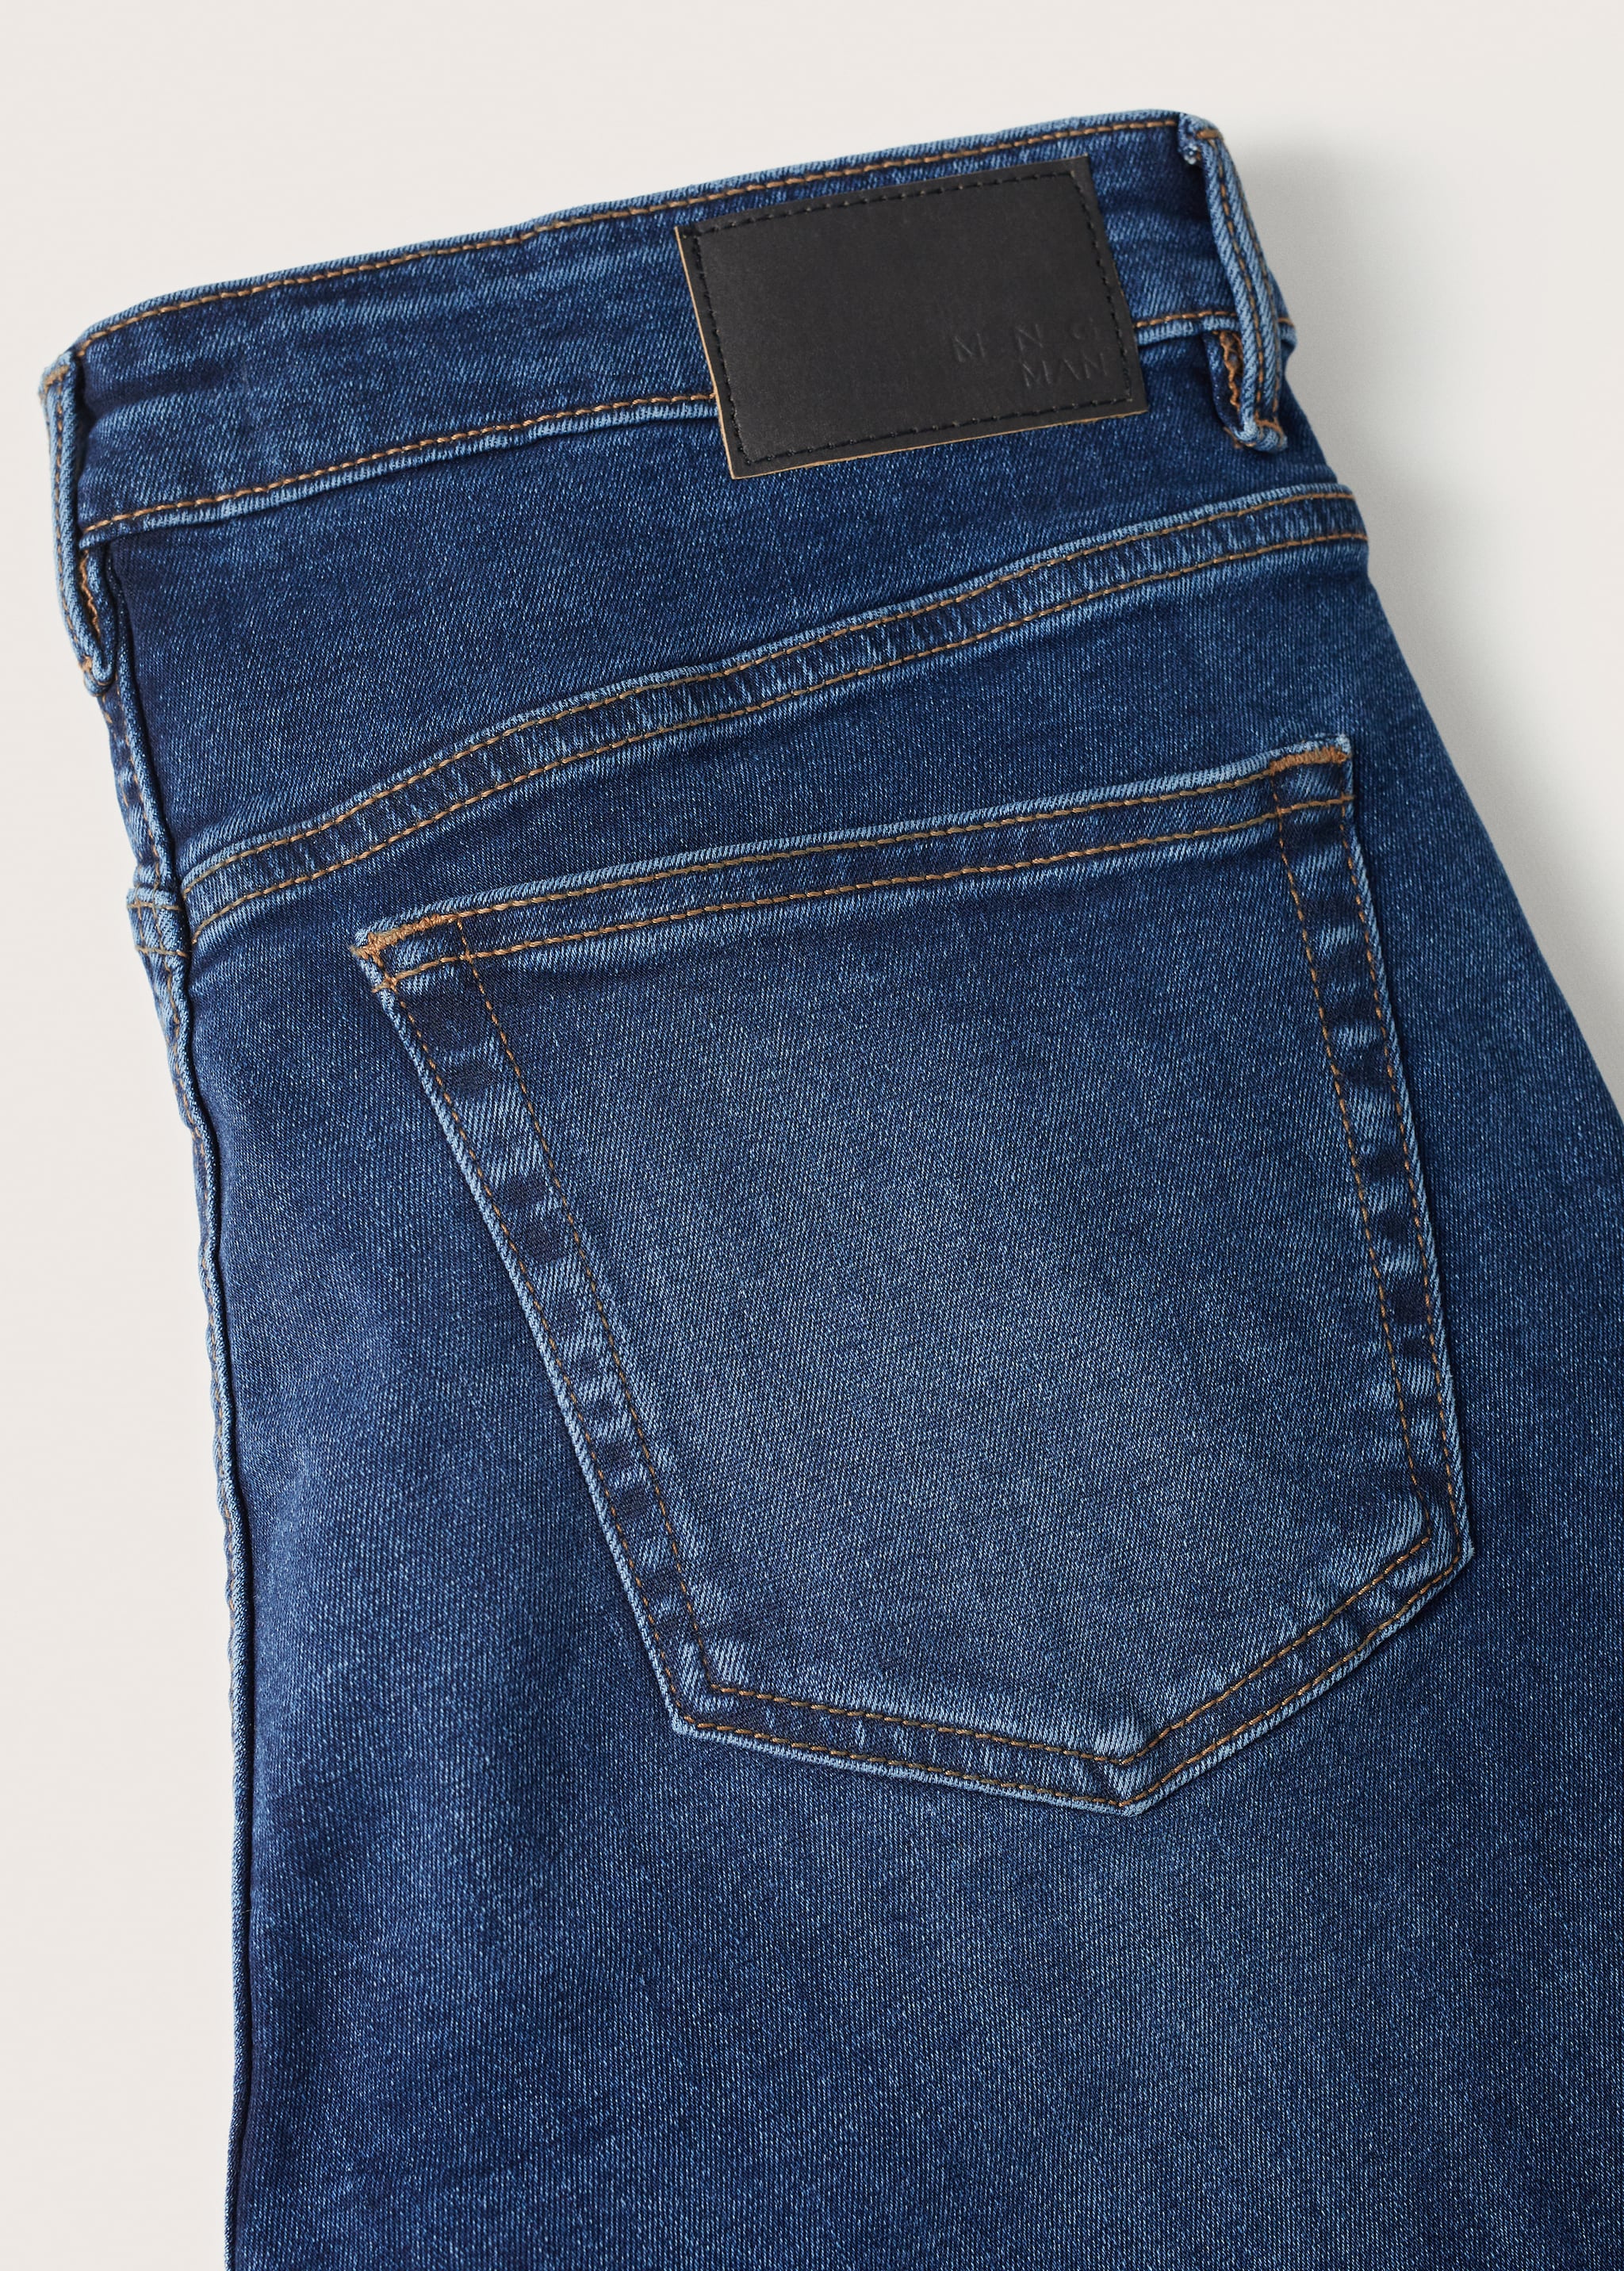 Skinny dark wash Jude jeans - Details of the article 8